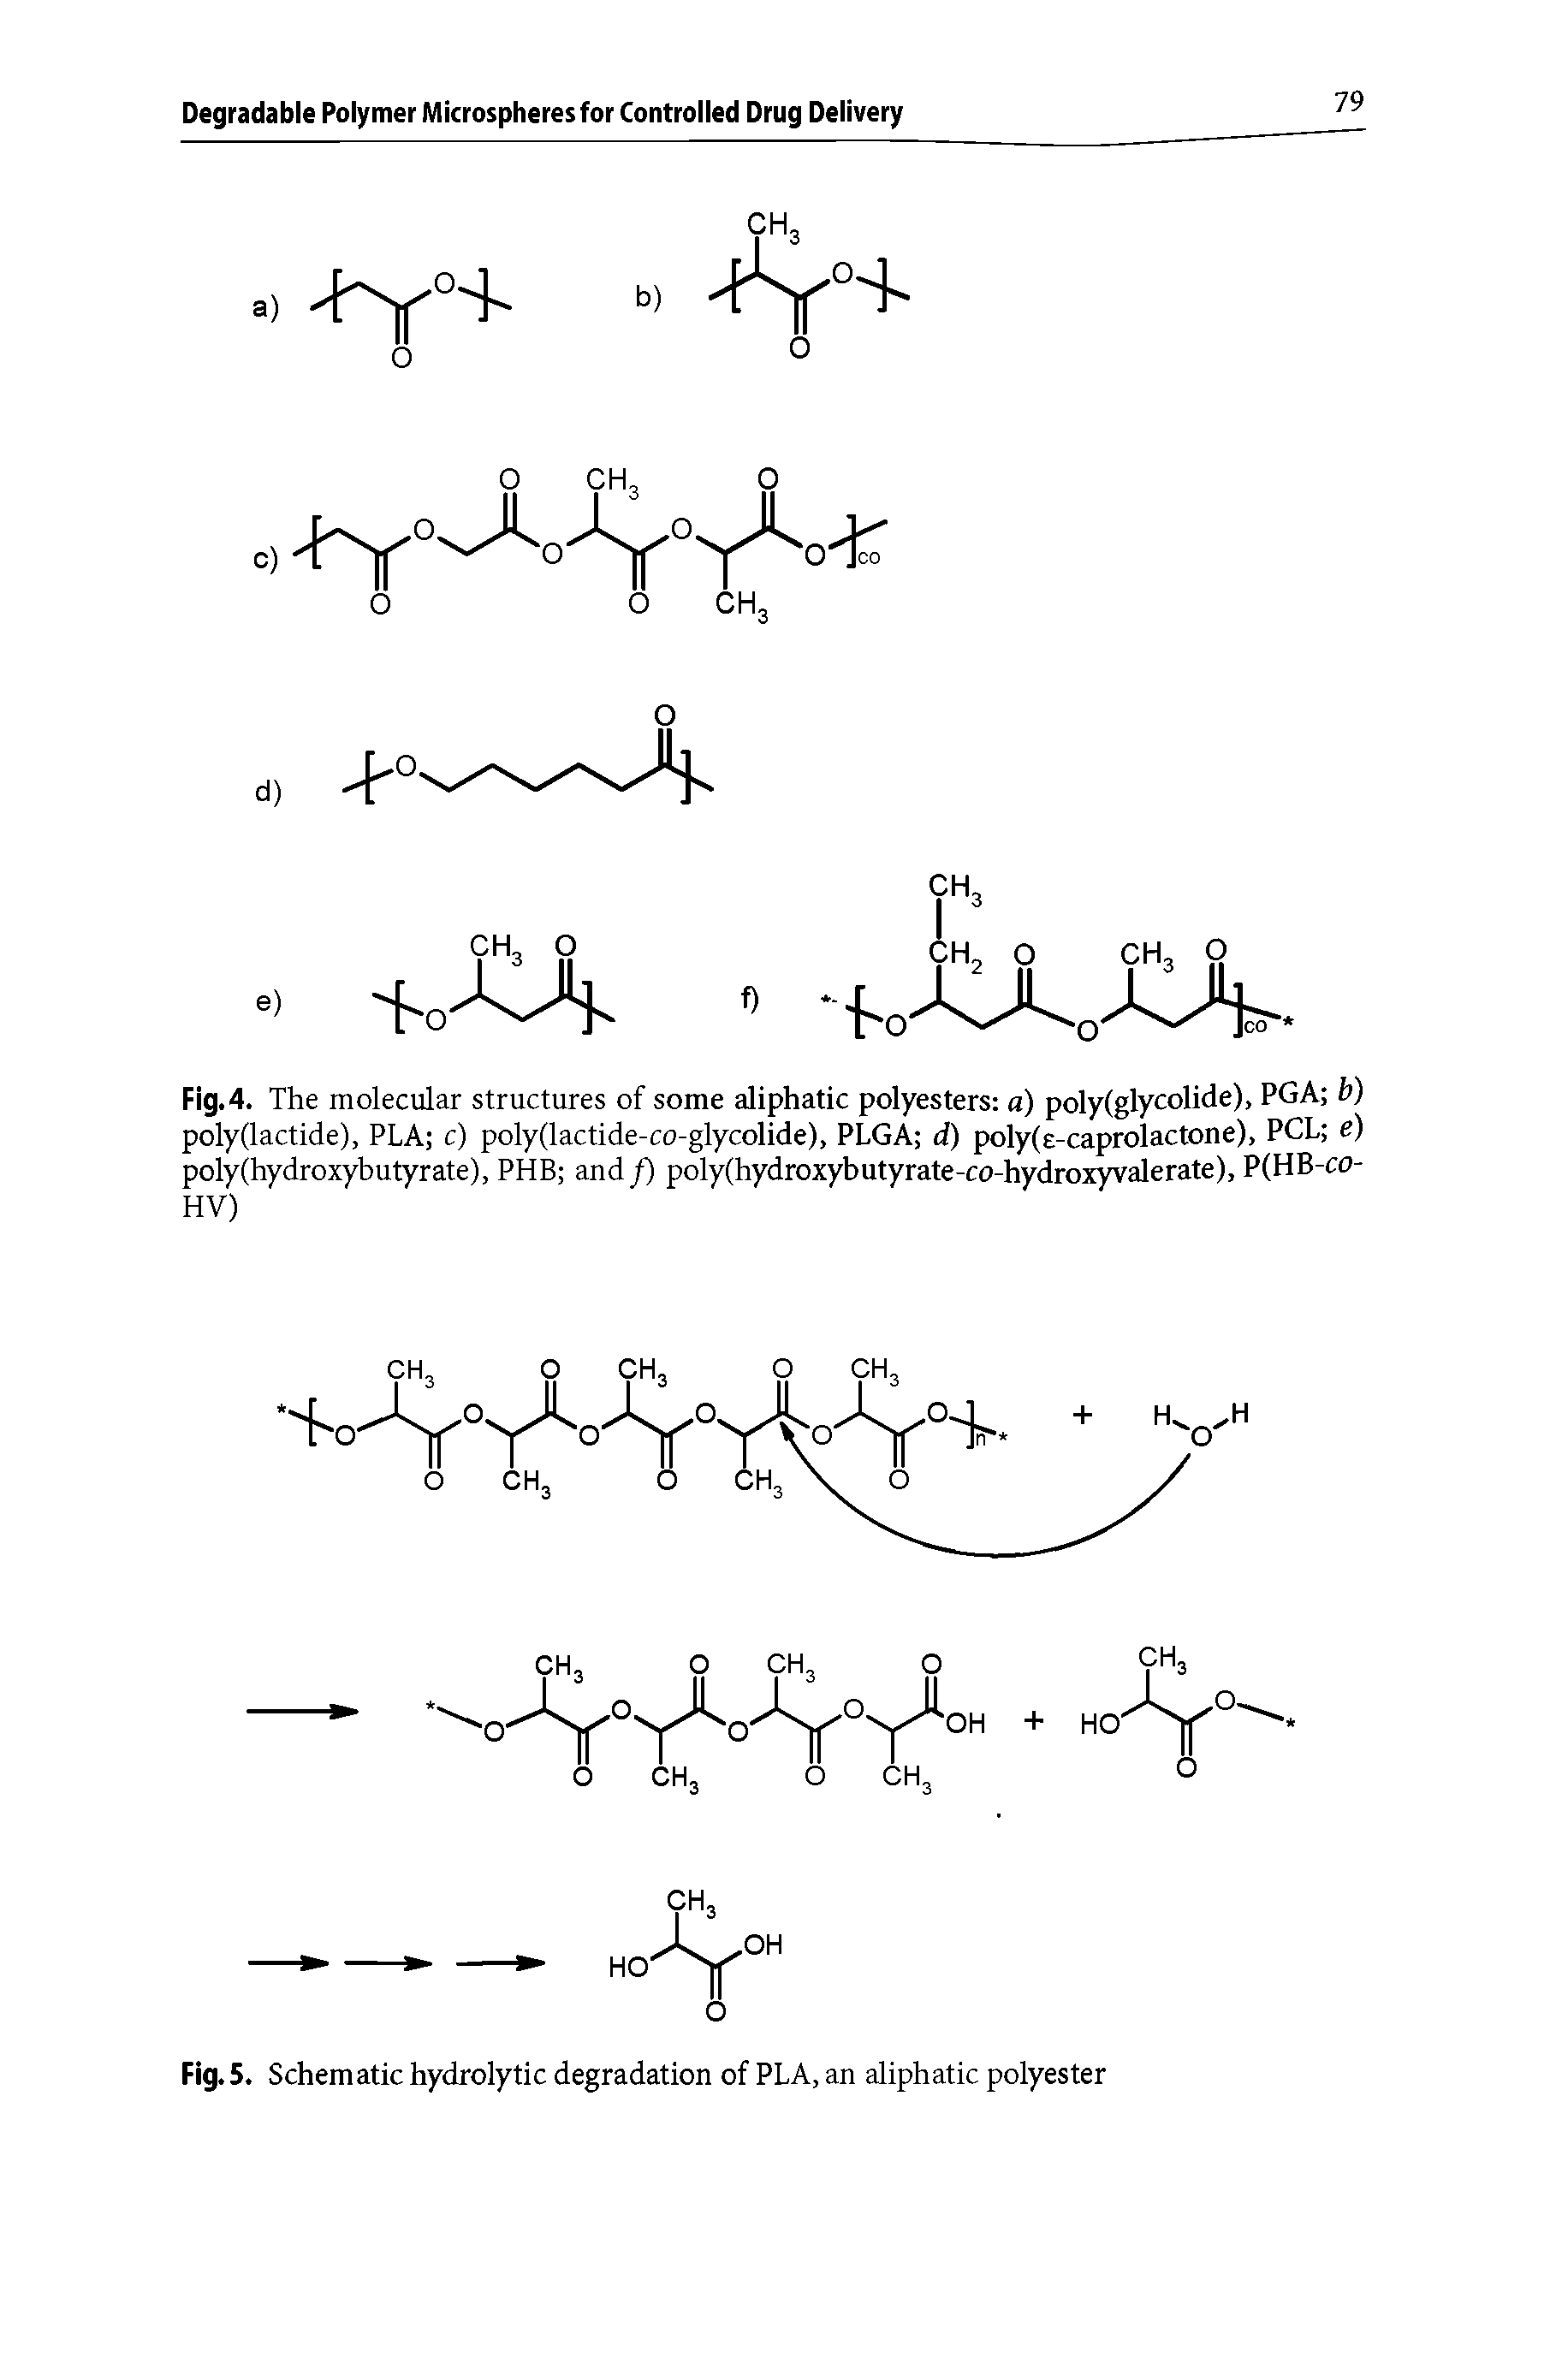 Fig. 4. The molecular structures of some aliphatic polyesters a) poly(glycolide), PGA b) poly(lactide), PLA c) poly(lactide-co-glycolide), PLGA d) poly(e-caprolactone), PCL e) poly(hydroxybutyrate), PHB and f) poly(hydroxybutyrate-co-hydroxyvalerate), P(HB-co-HV)...